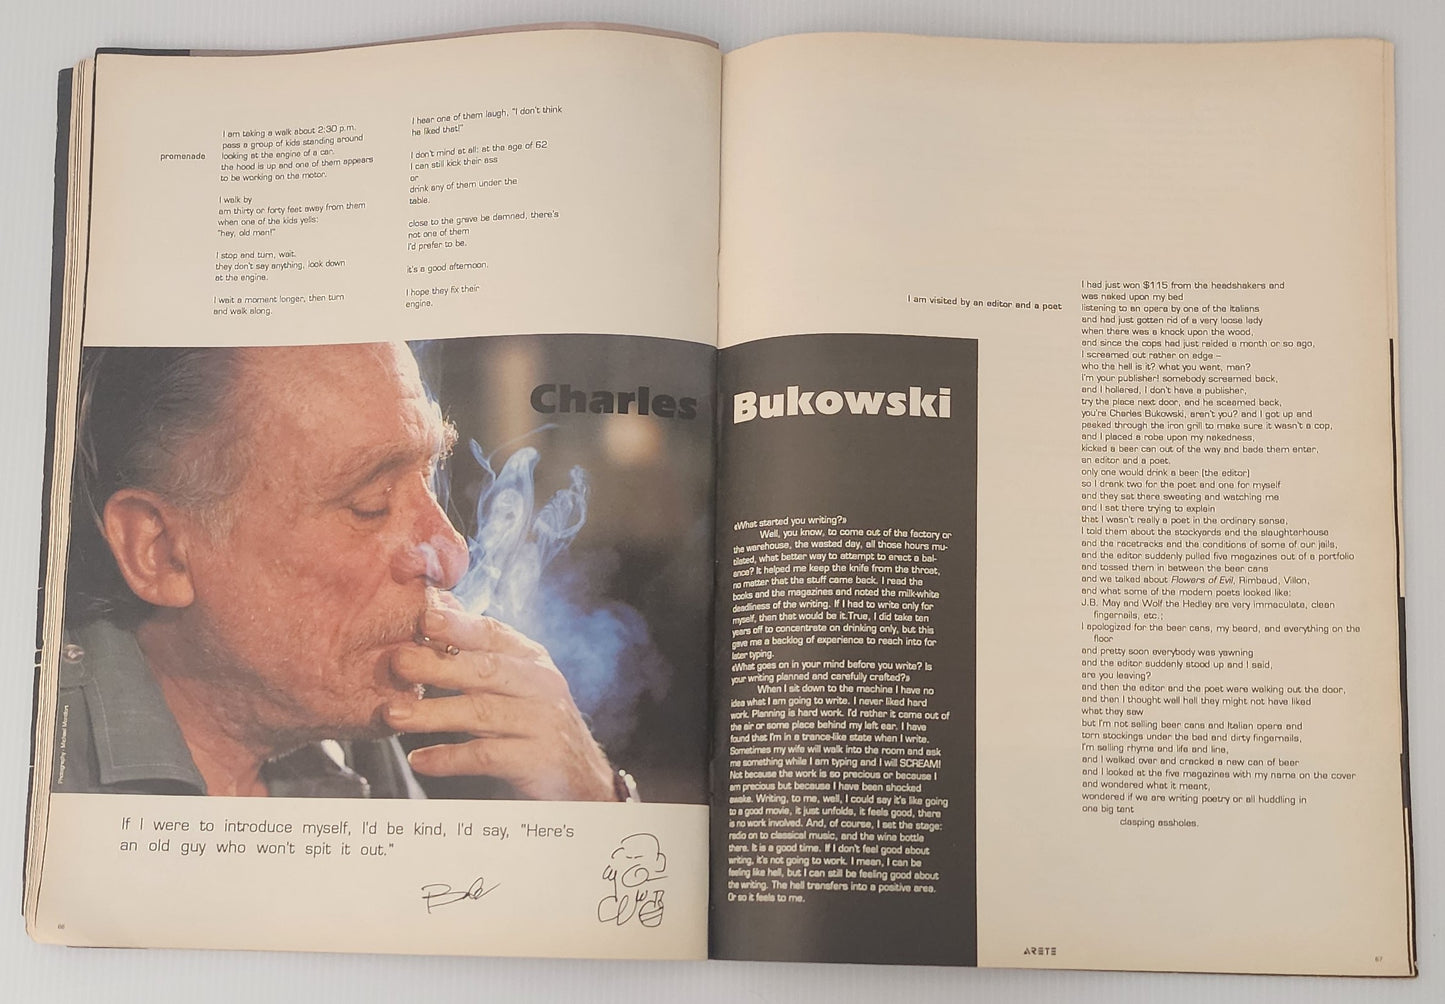 Arete July 1989 -- Bukowski Interview with Several Works, Plus Barfly Photos